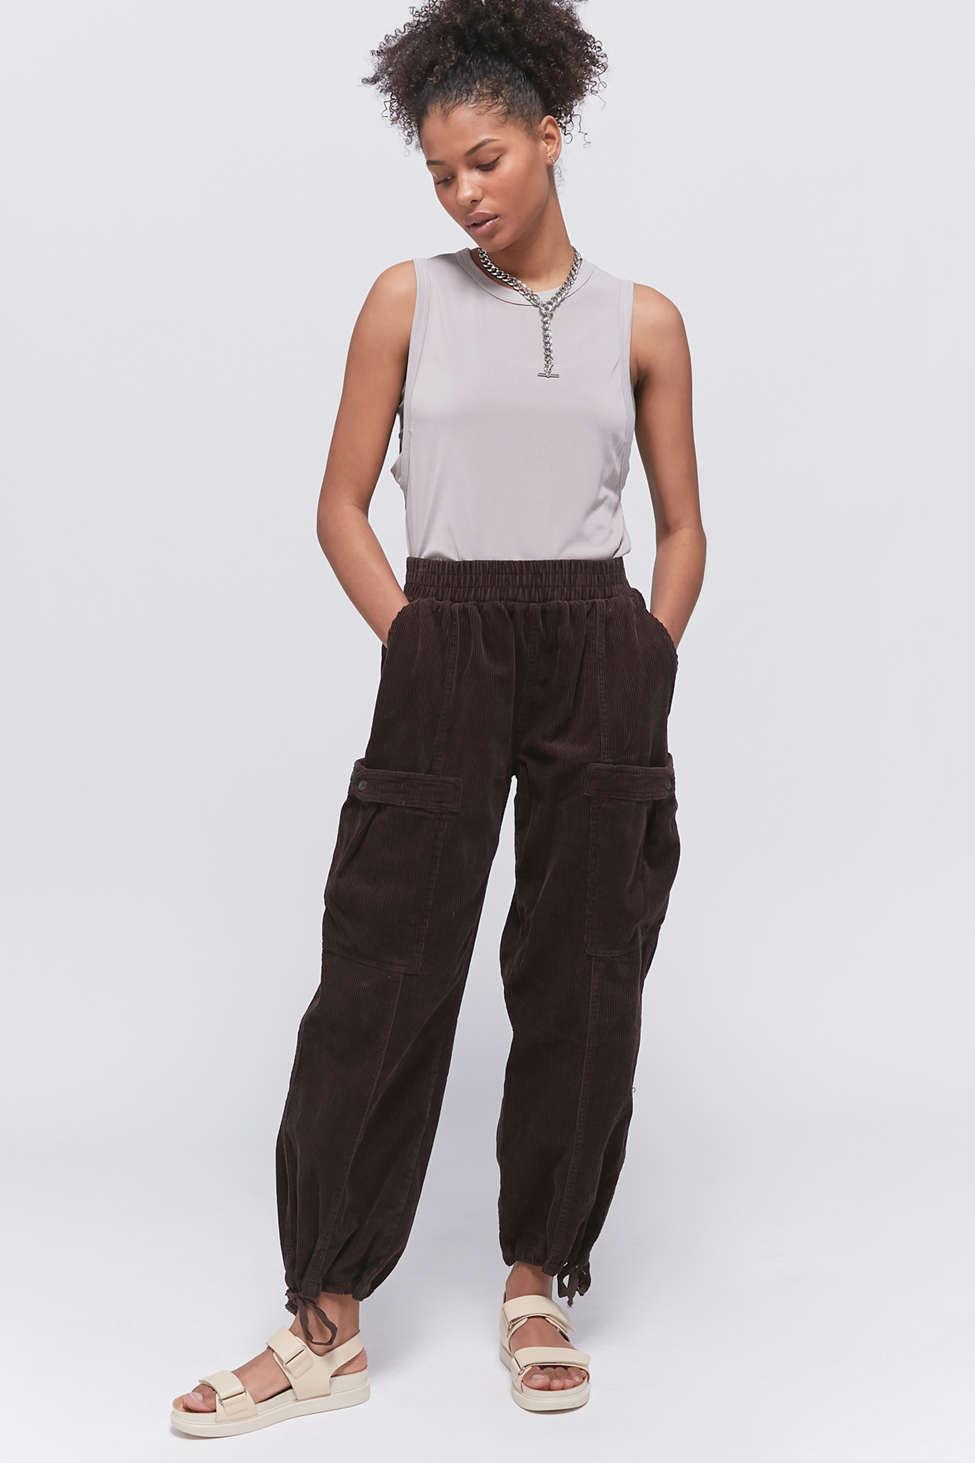 Urban Outfitters Uo Vivi Corduroy Cargo Jogger Pant in Black | Lyst